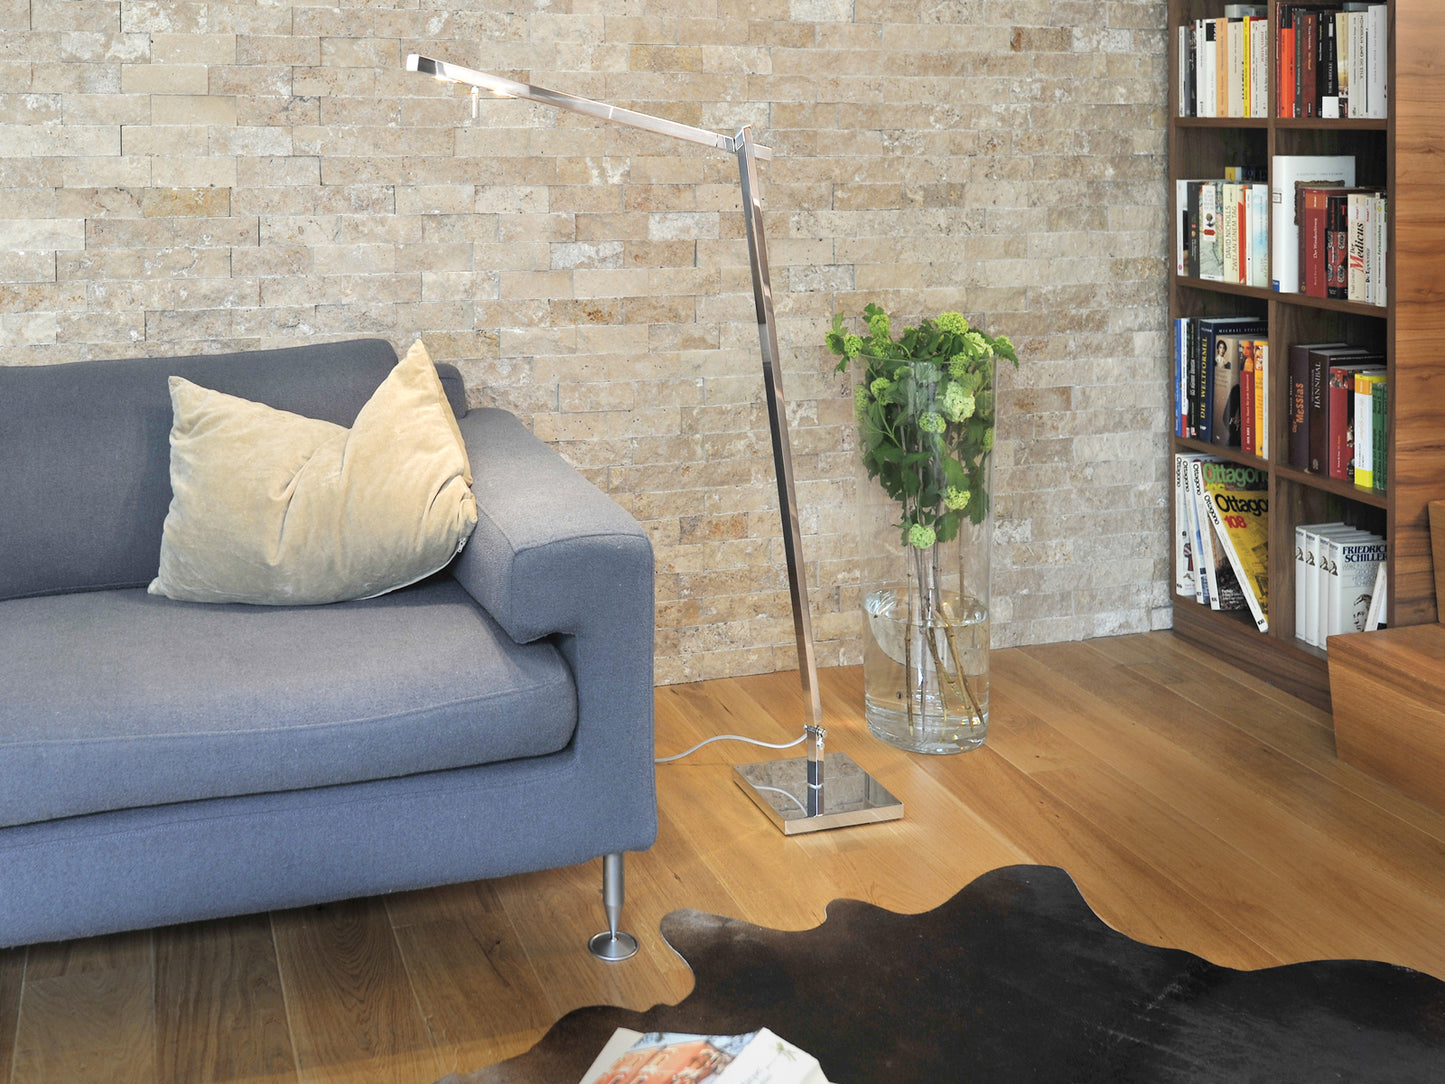 Byok Squadrone Floor Lamp in High Gloss Polished Finish in a living room